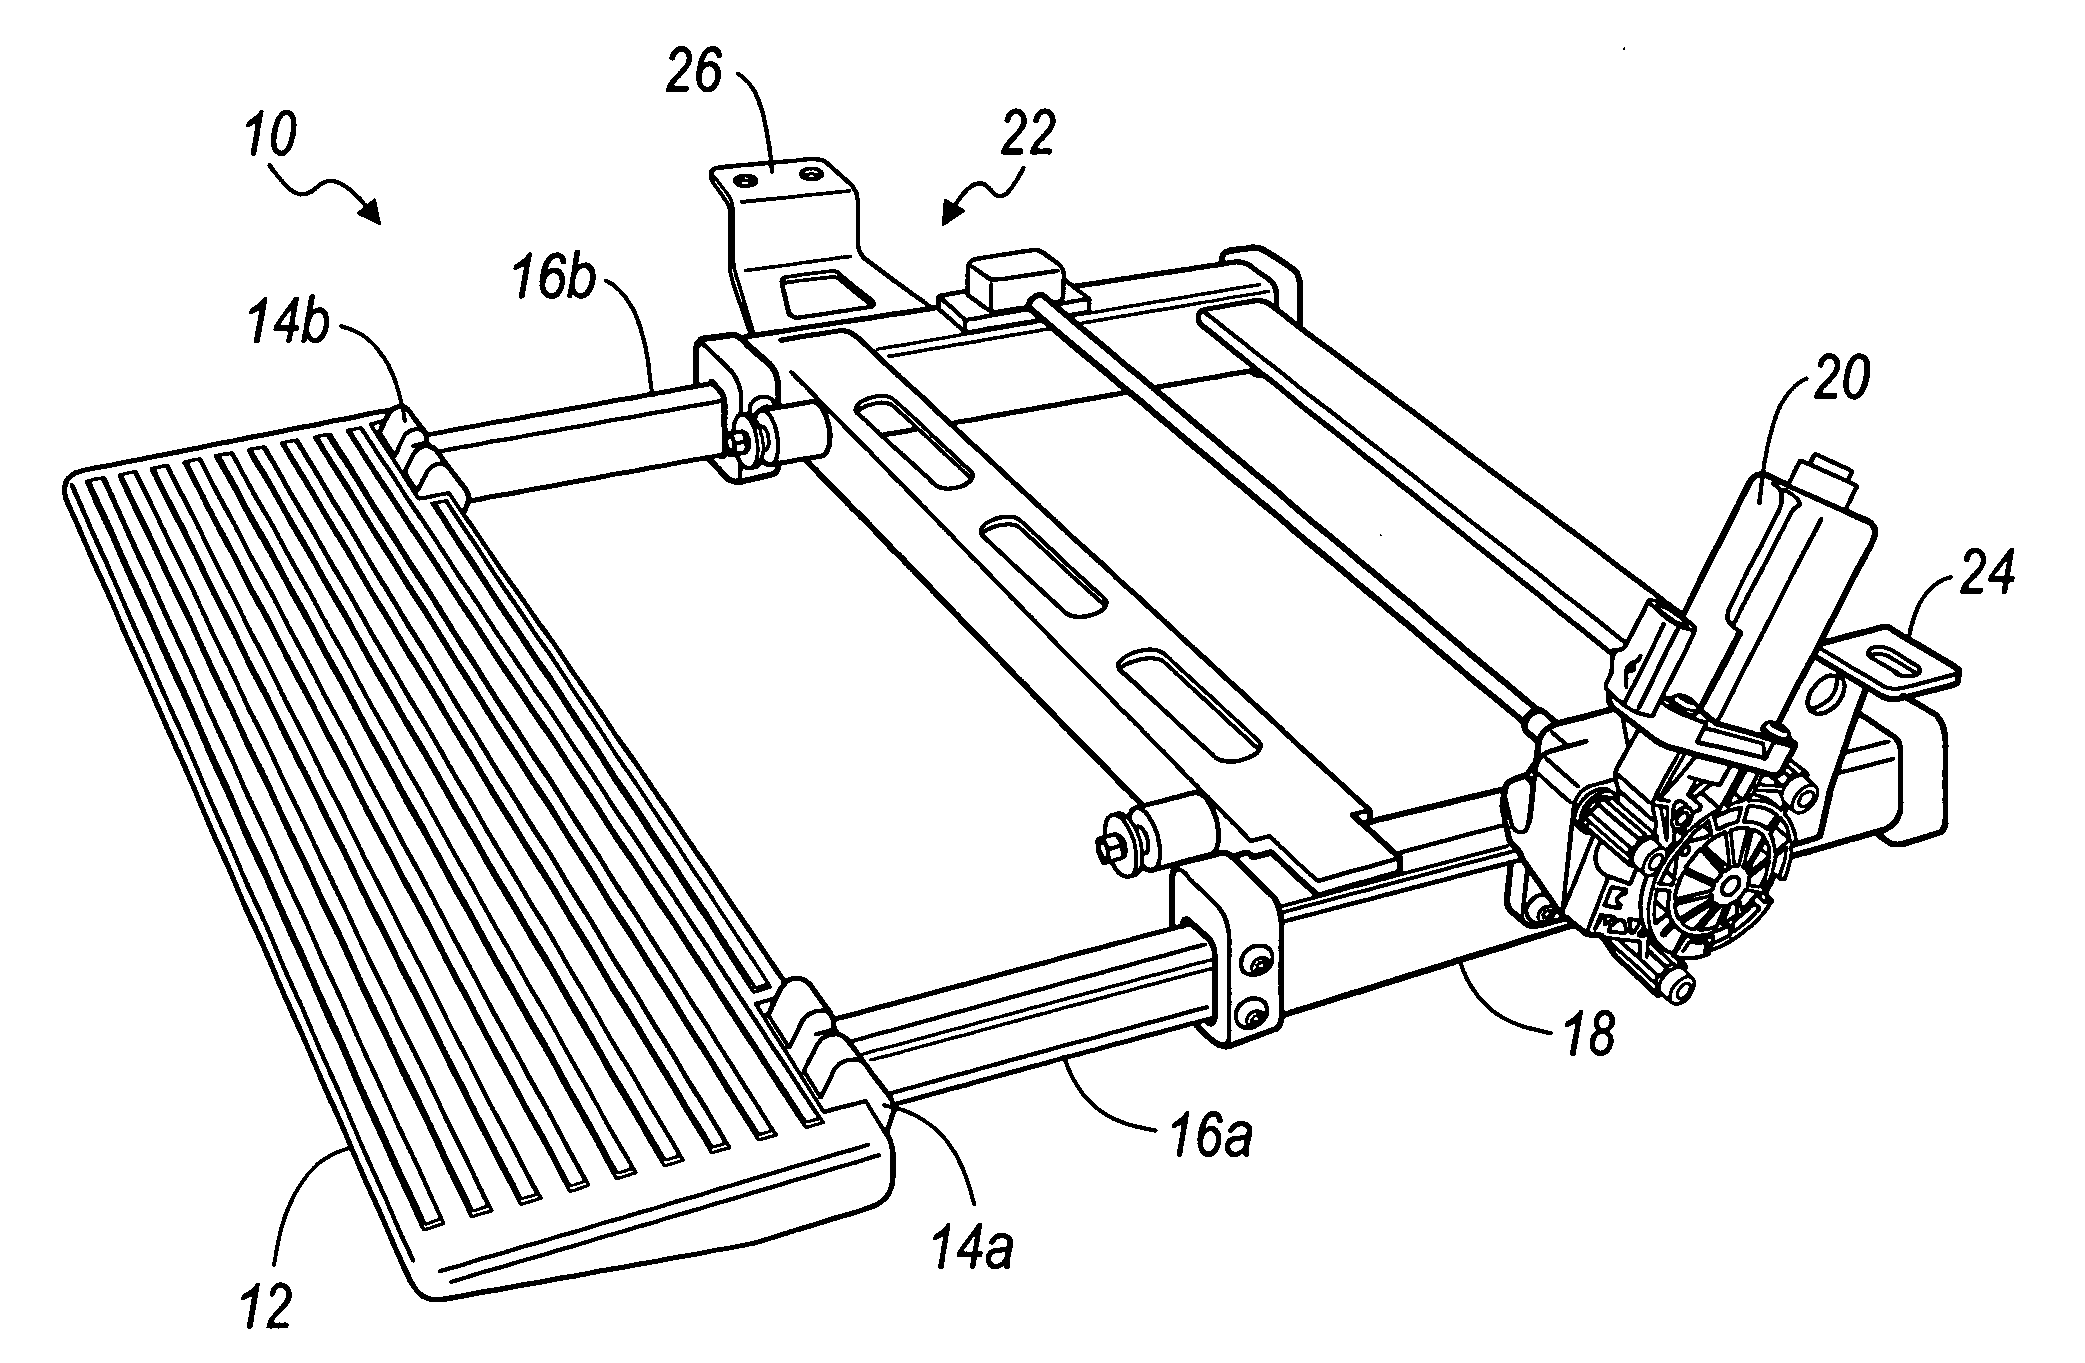 Automated deployable running board